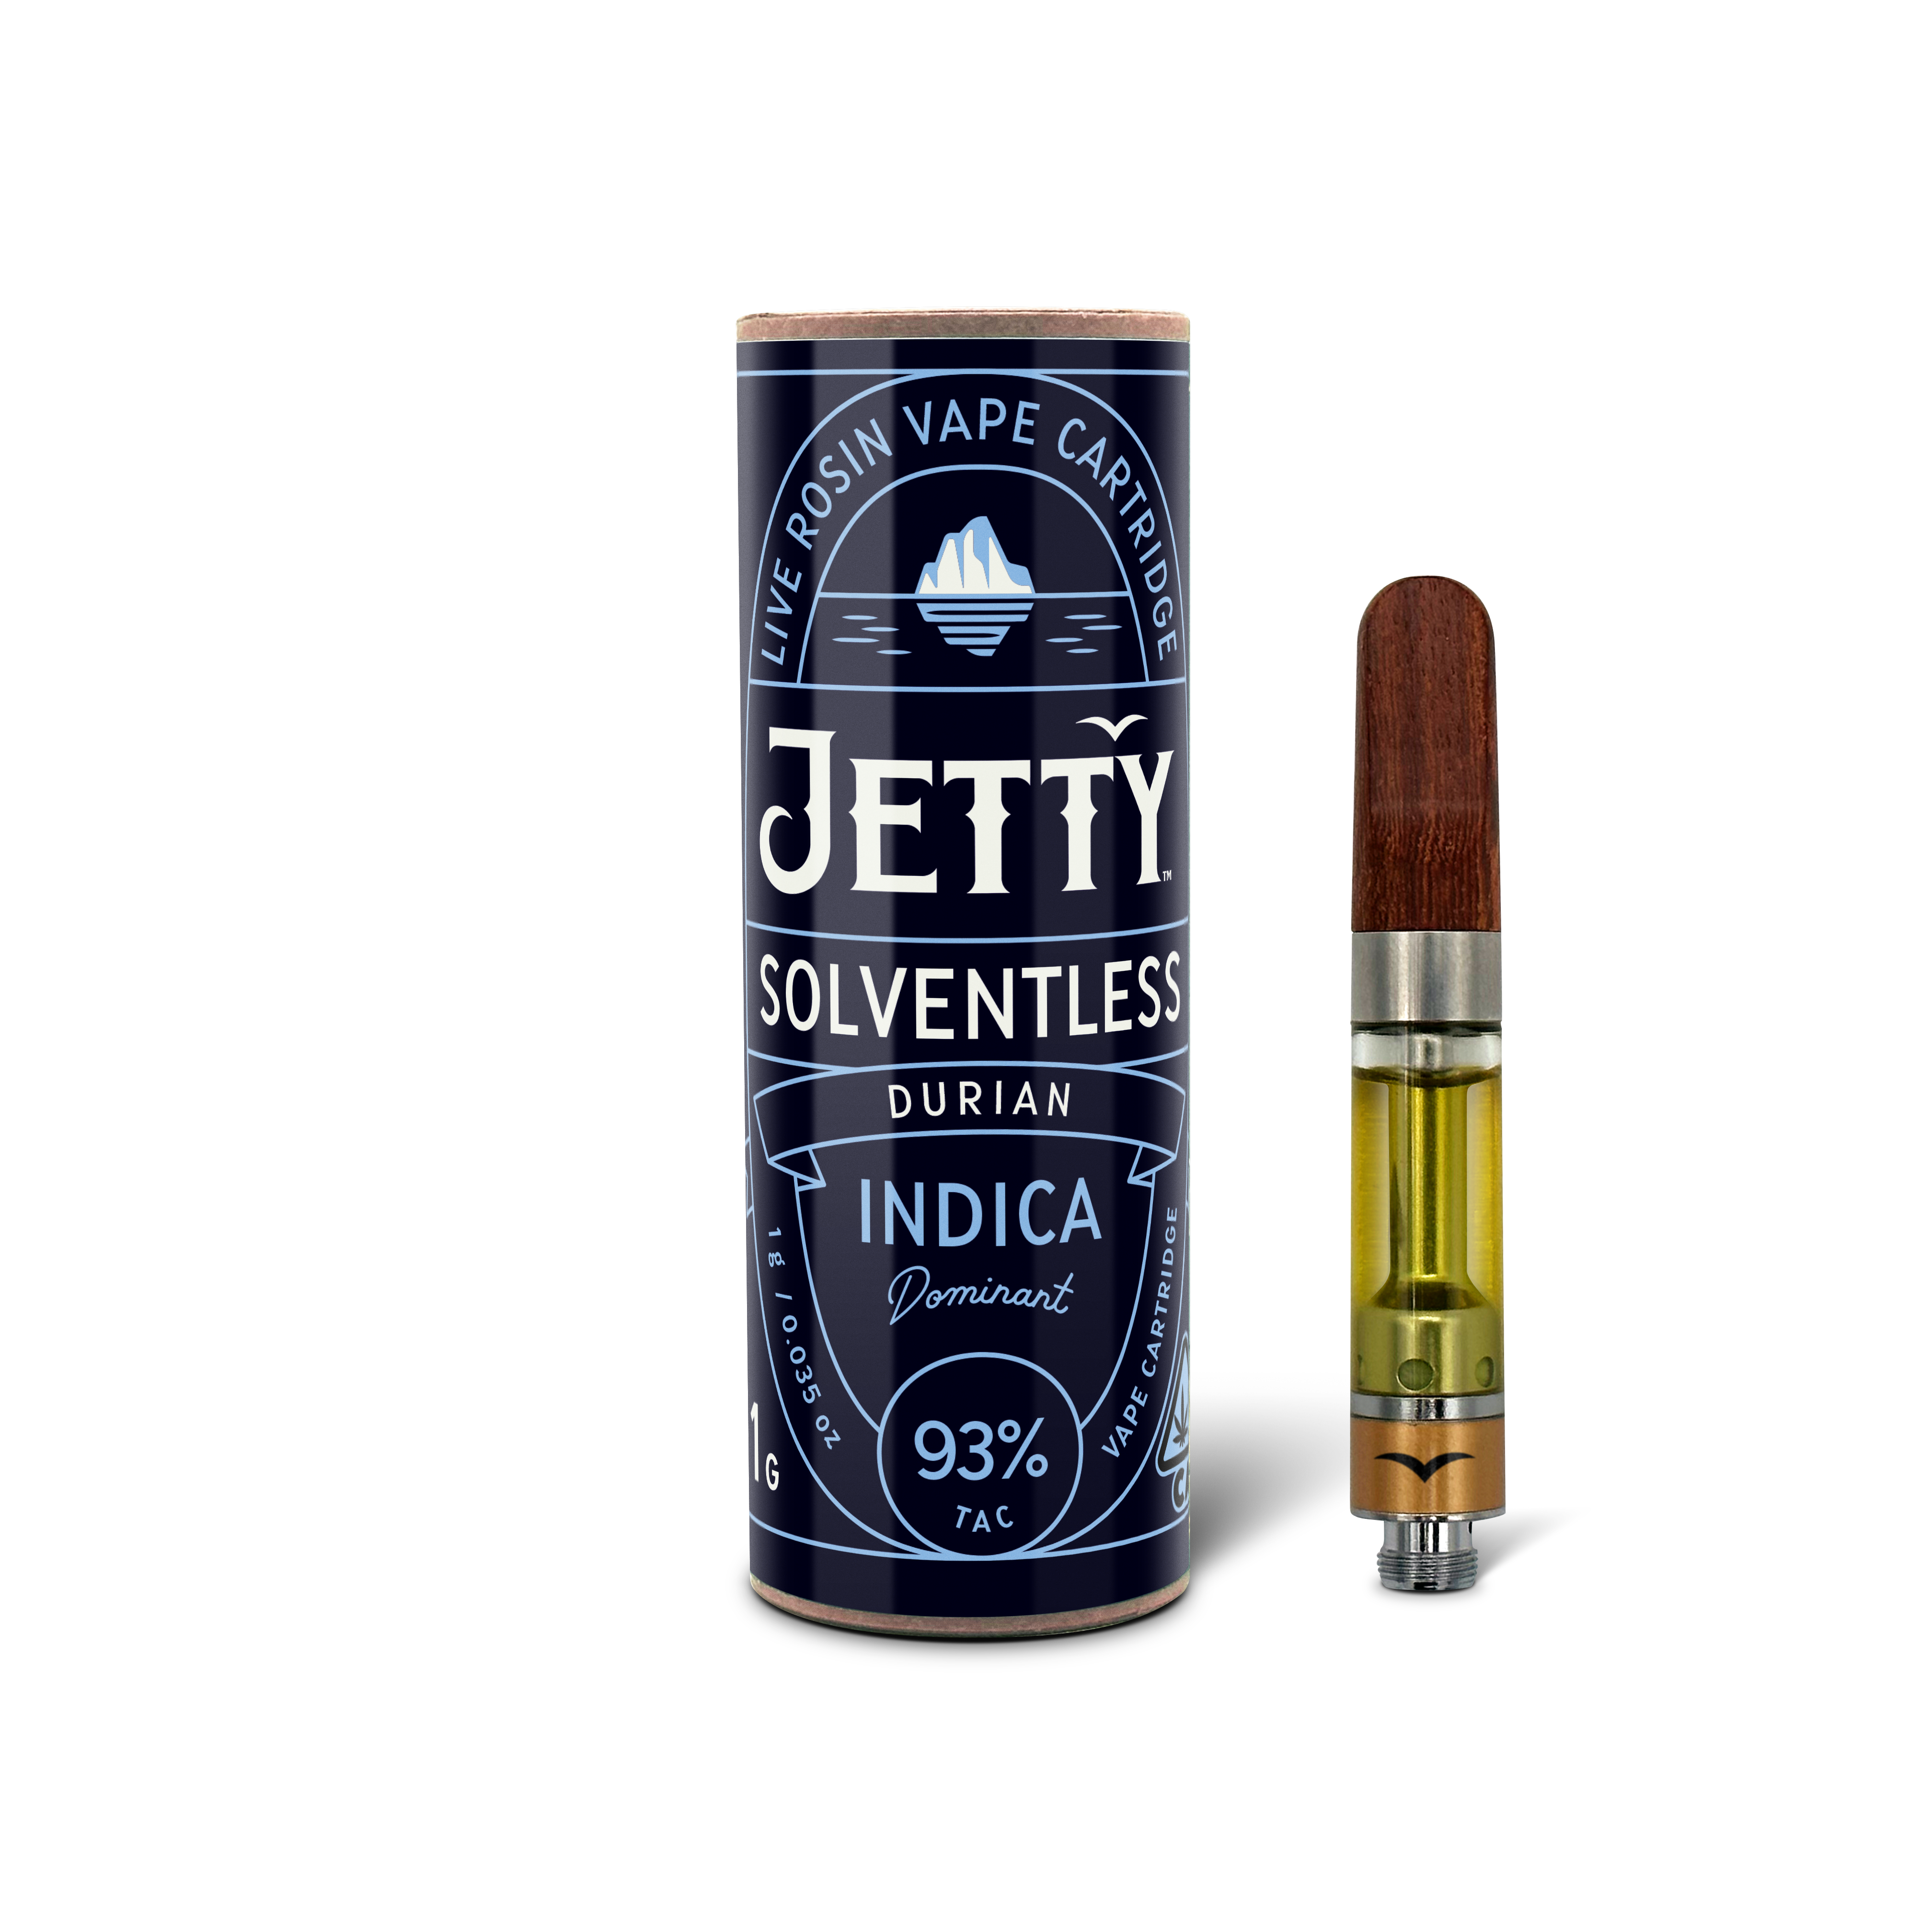 A photograph of Jetty Cartridge 1g Solventless Durian